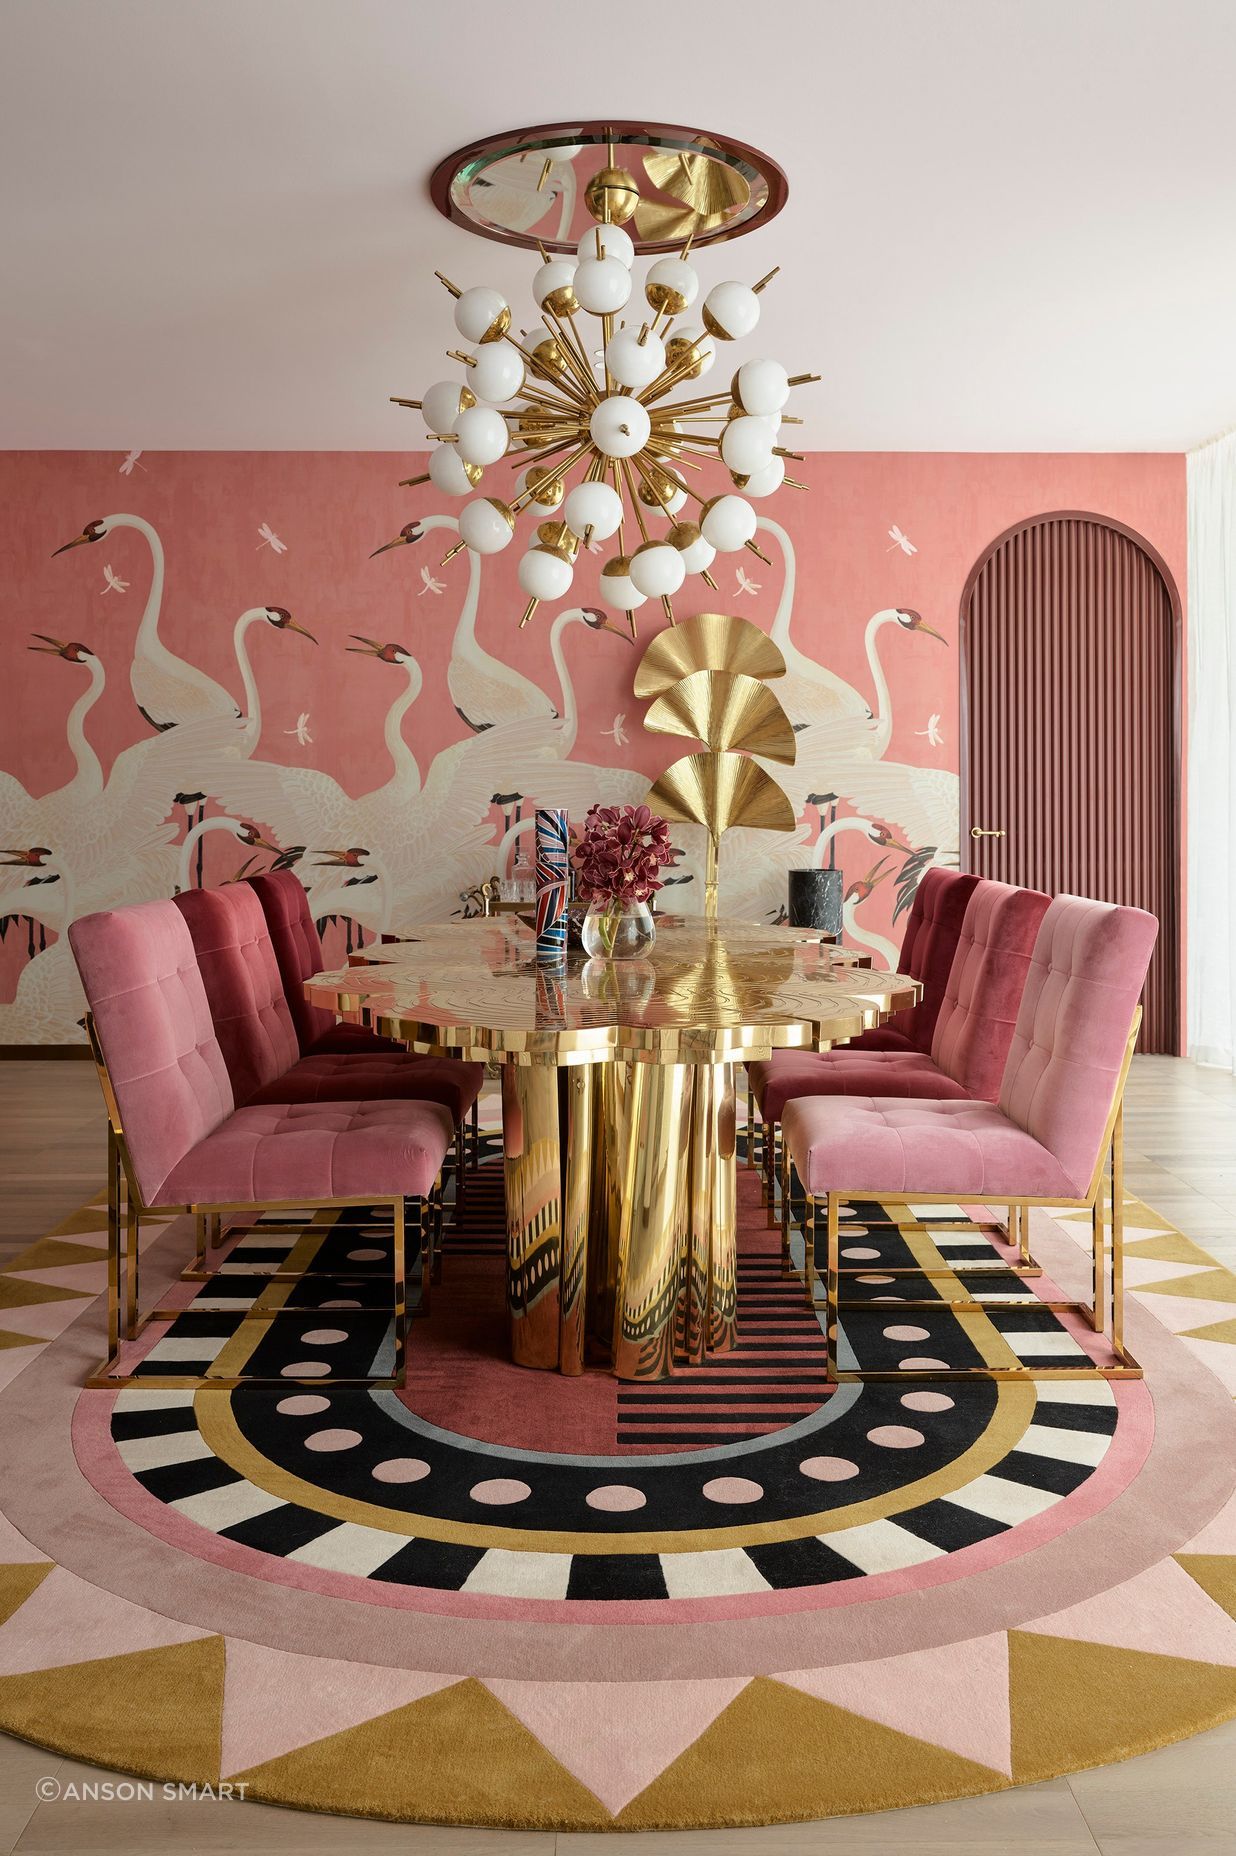 A custom rug designed by Greg Natale for a flamboyant formal dining room.